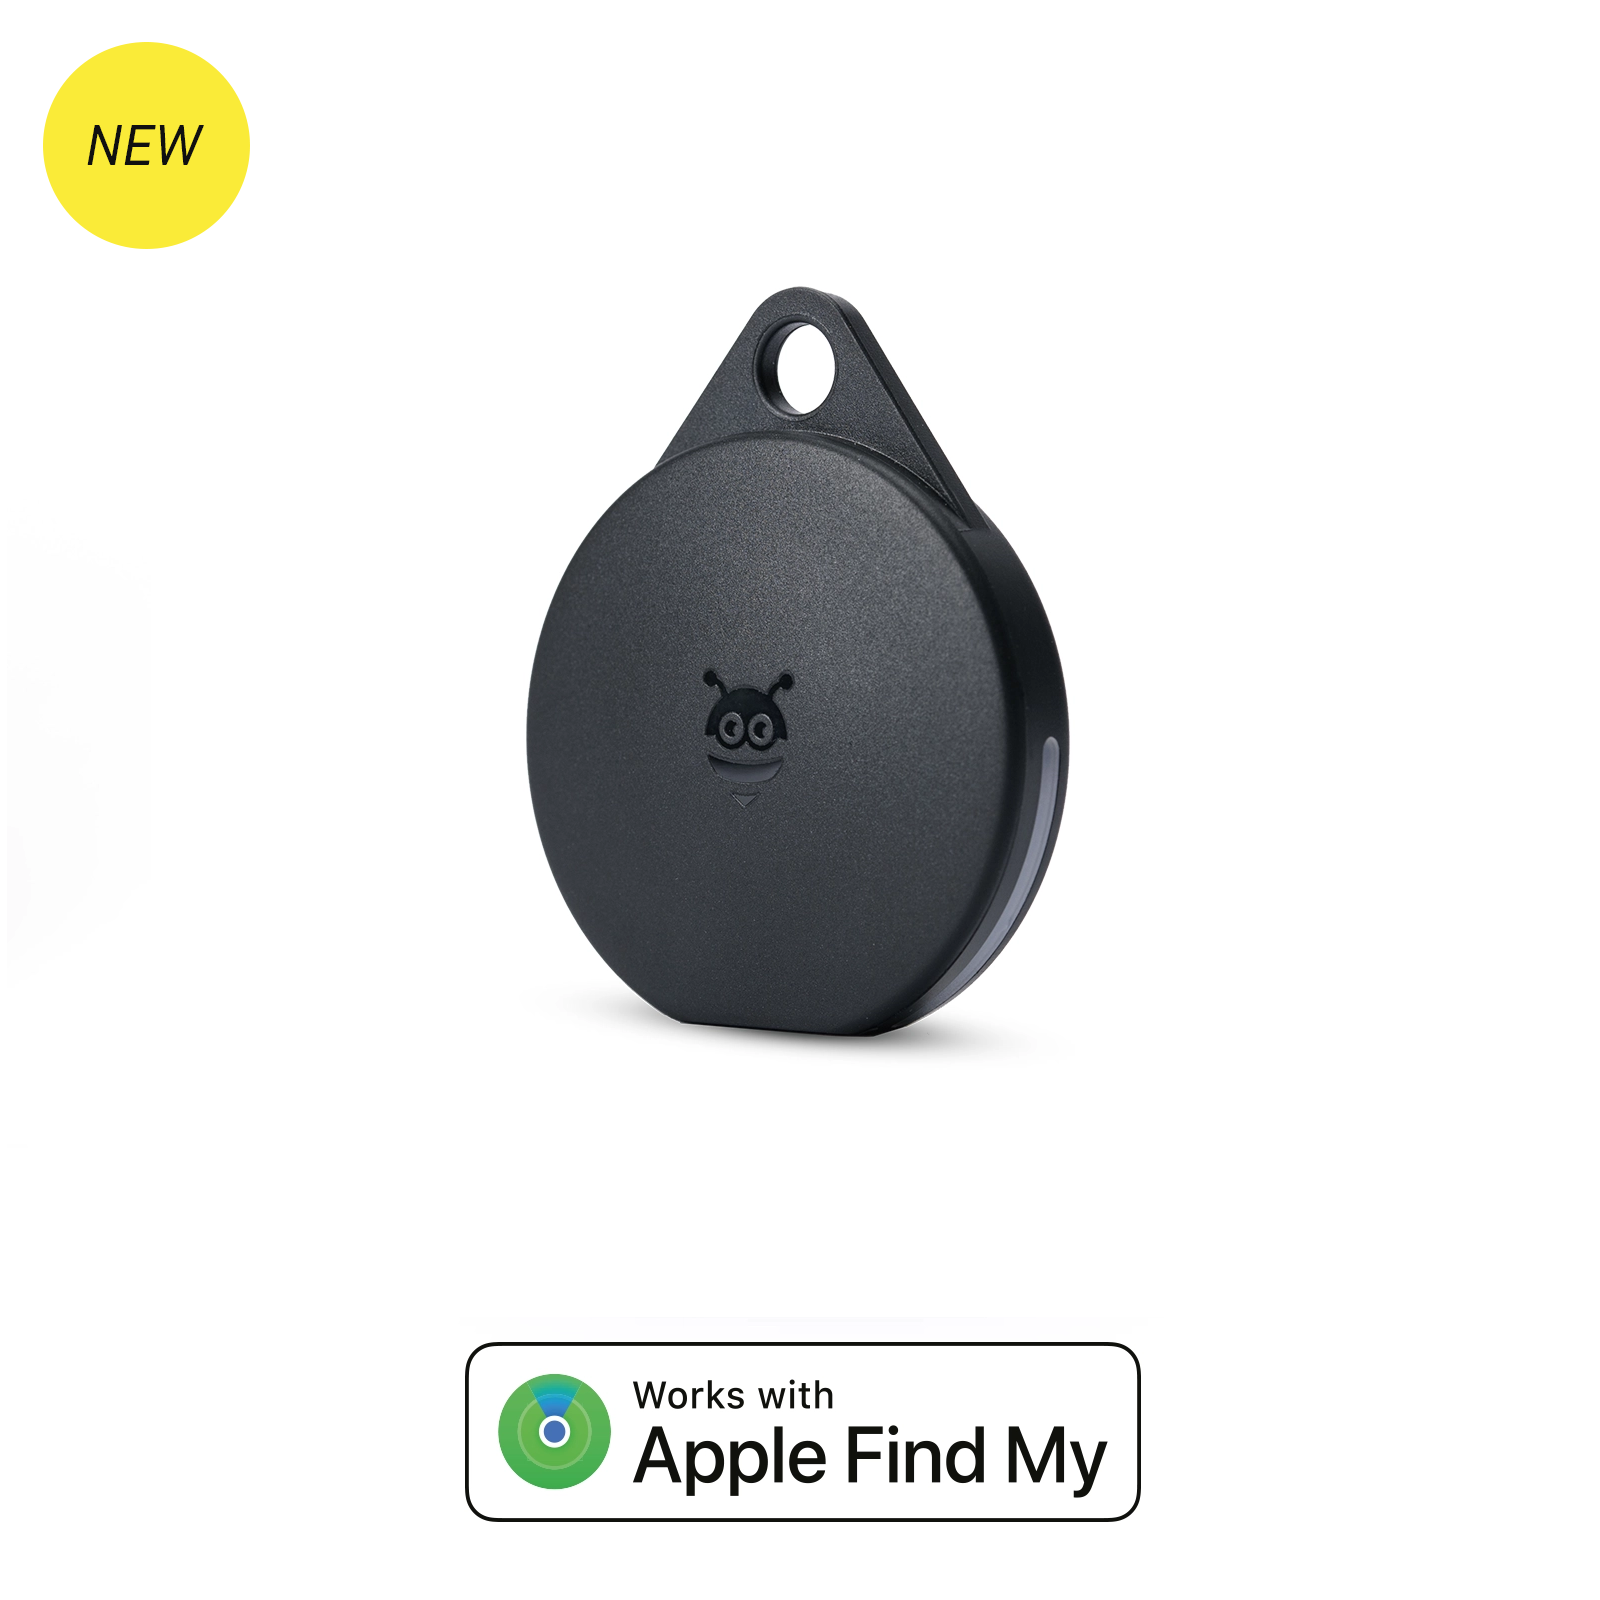 Chipolo ONE Spot 3-Pack Item Locator - Wi-Fi Compatible, Works with iOS -  Find Your Keys, Luggage, and More with Apple Find My Network